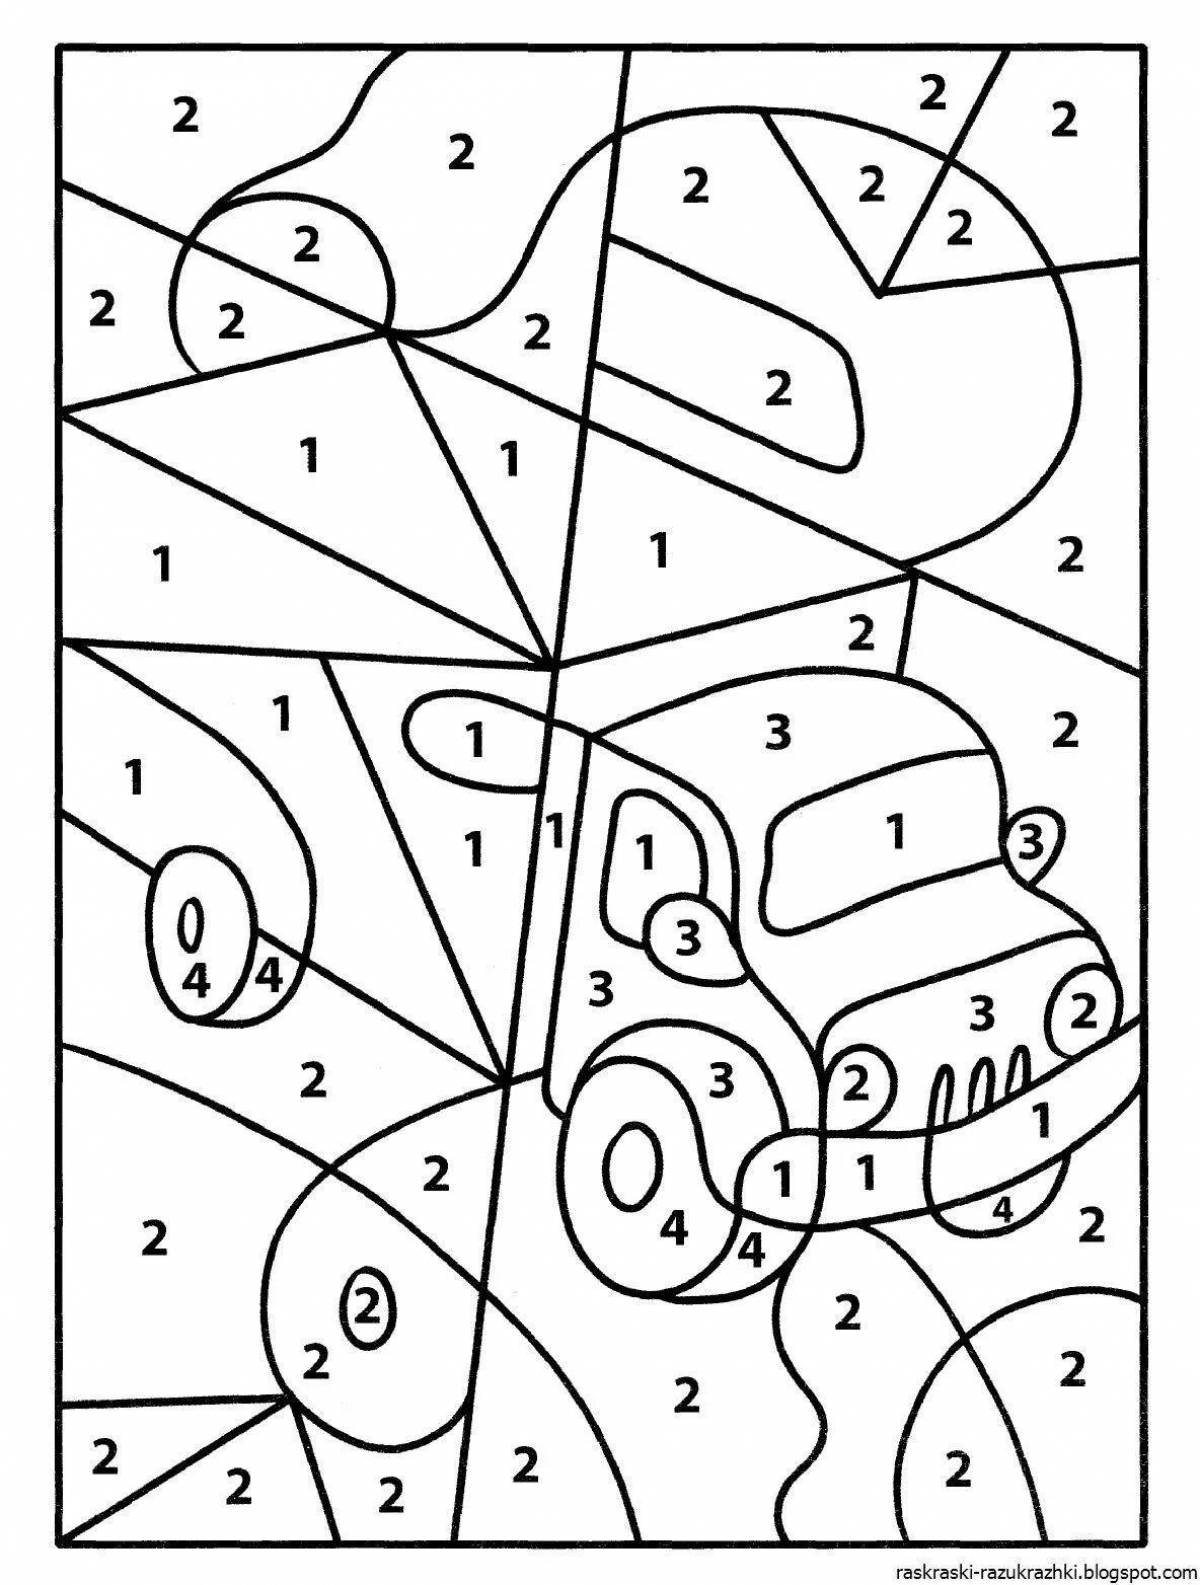 Exciting phone games by numbers coloring book